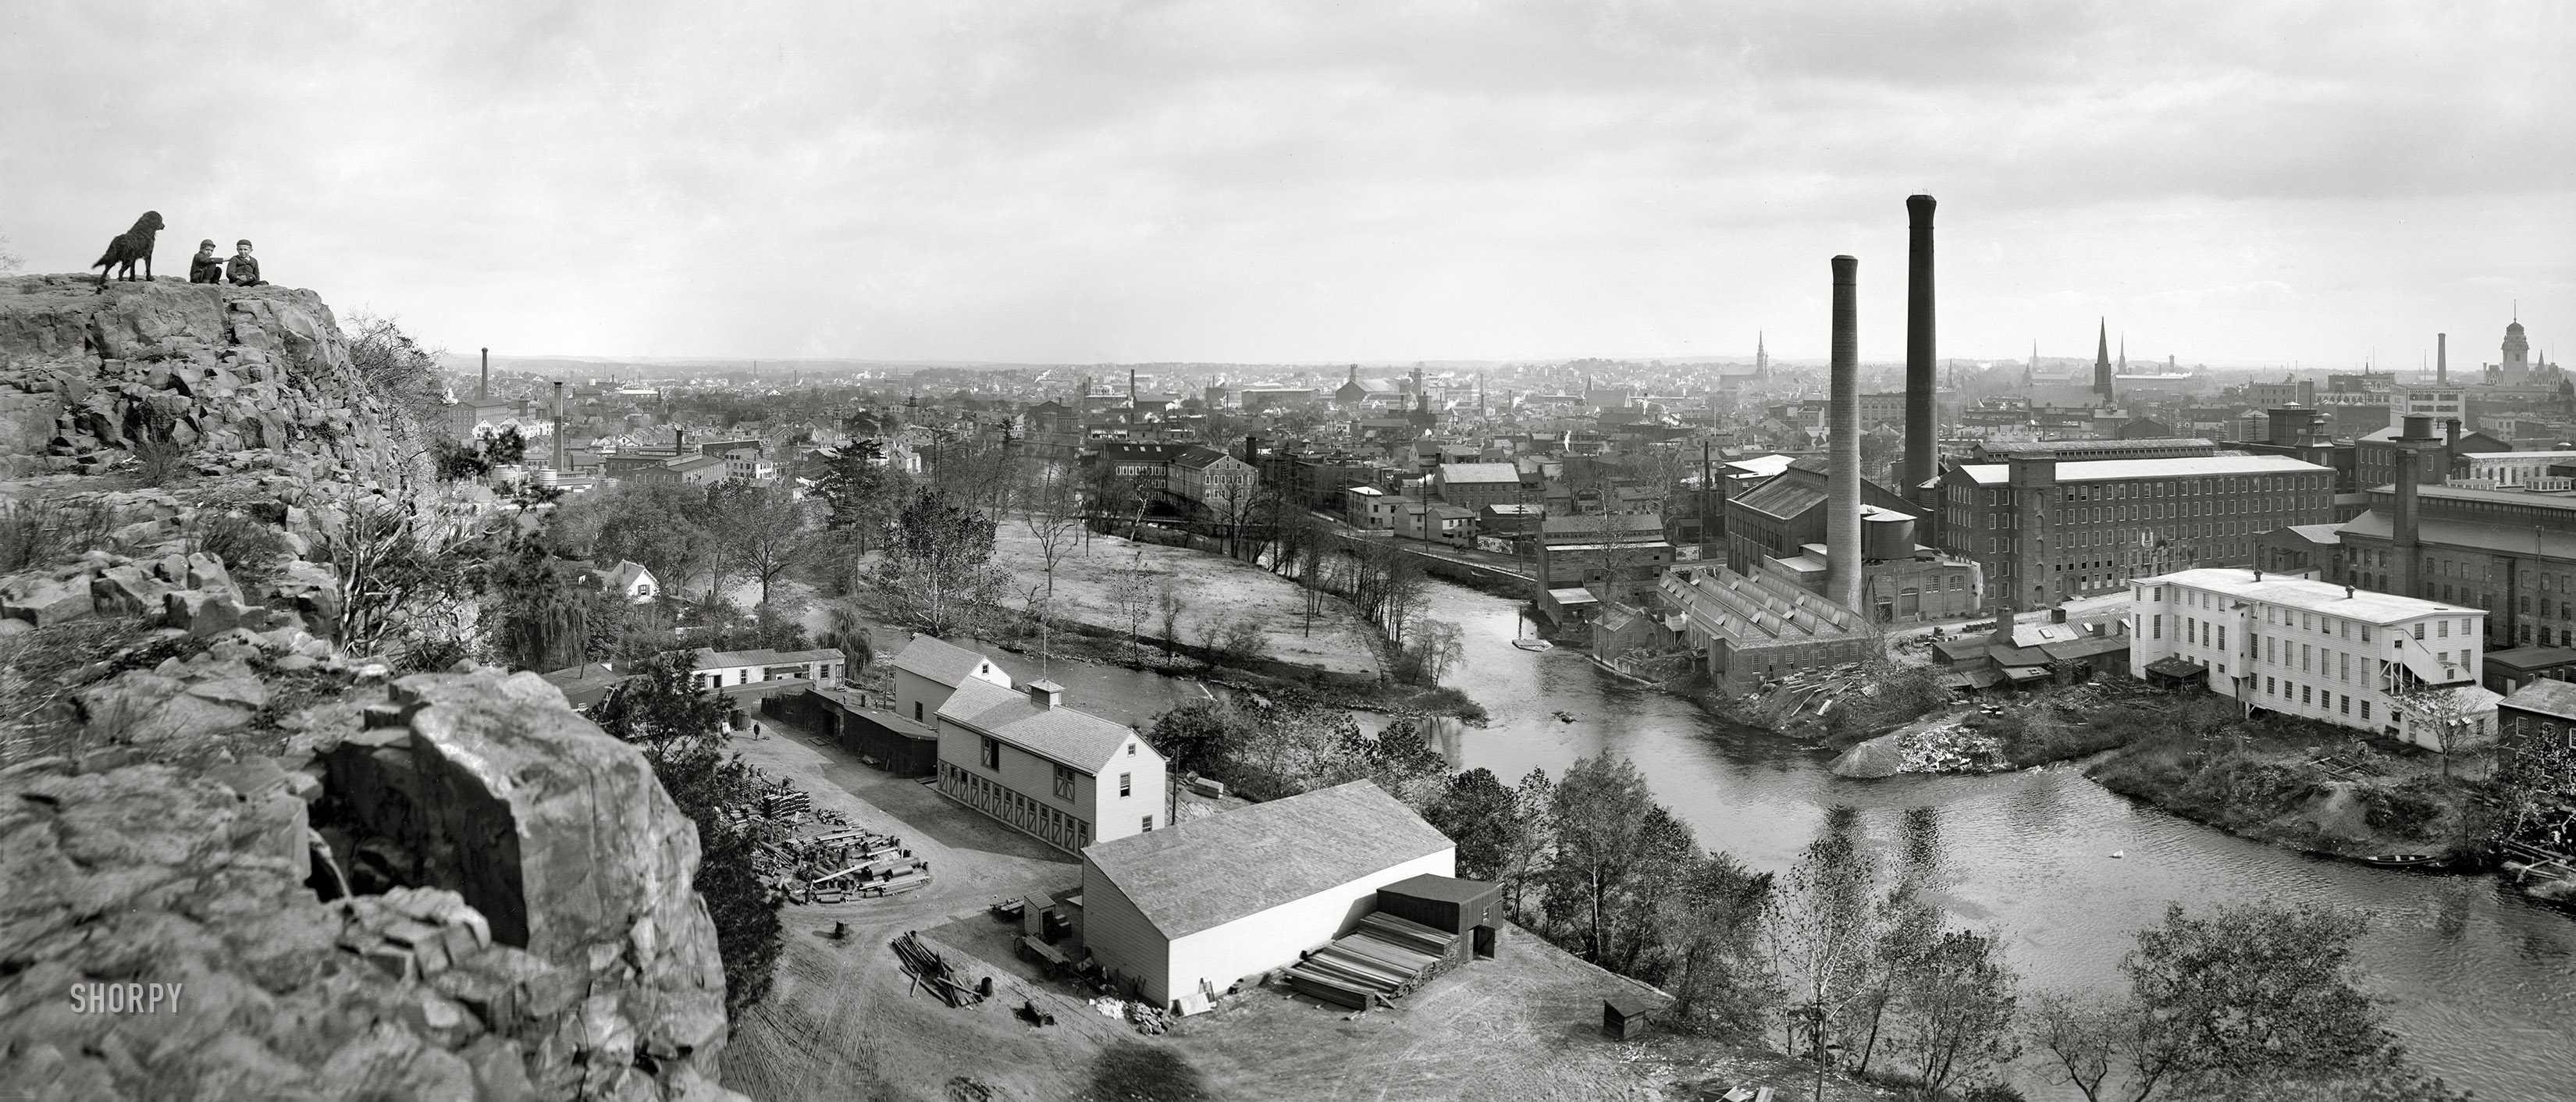 Circa 1901. "Paterson, New Jersey, and Passaic River from Reservoir Park." Panorama made from two 8x10 inch glass negatives, the left half seen here a decade ago; the right half became available earlier this year. Detroit Photographic Company. View full size.